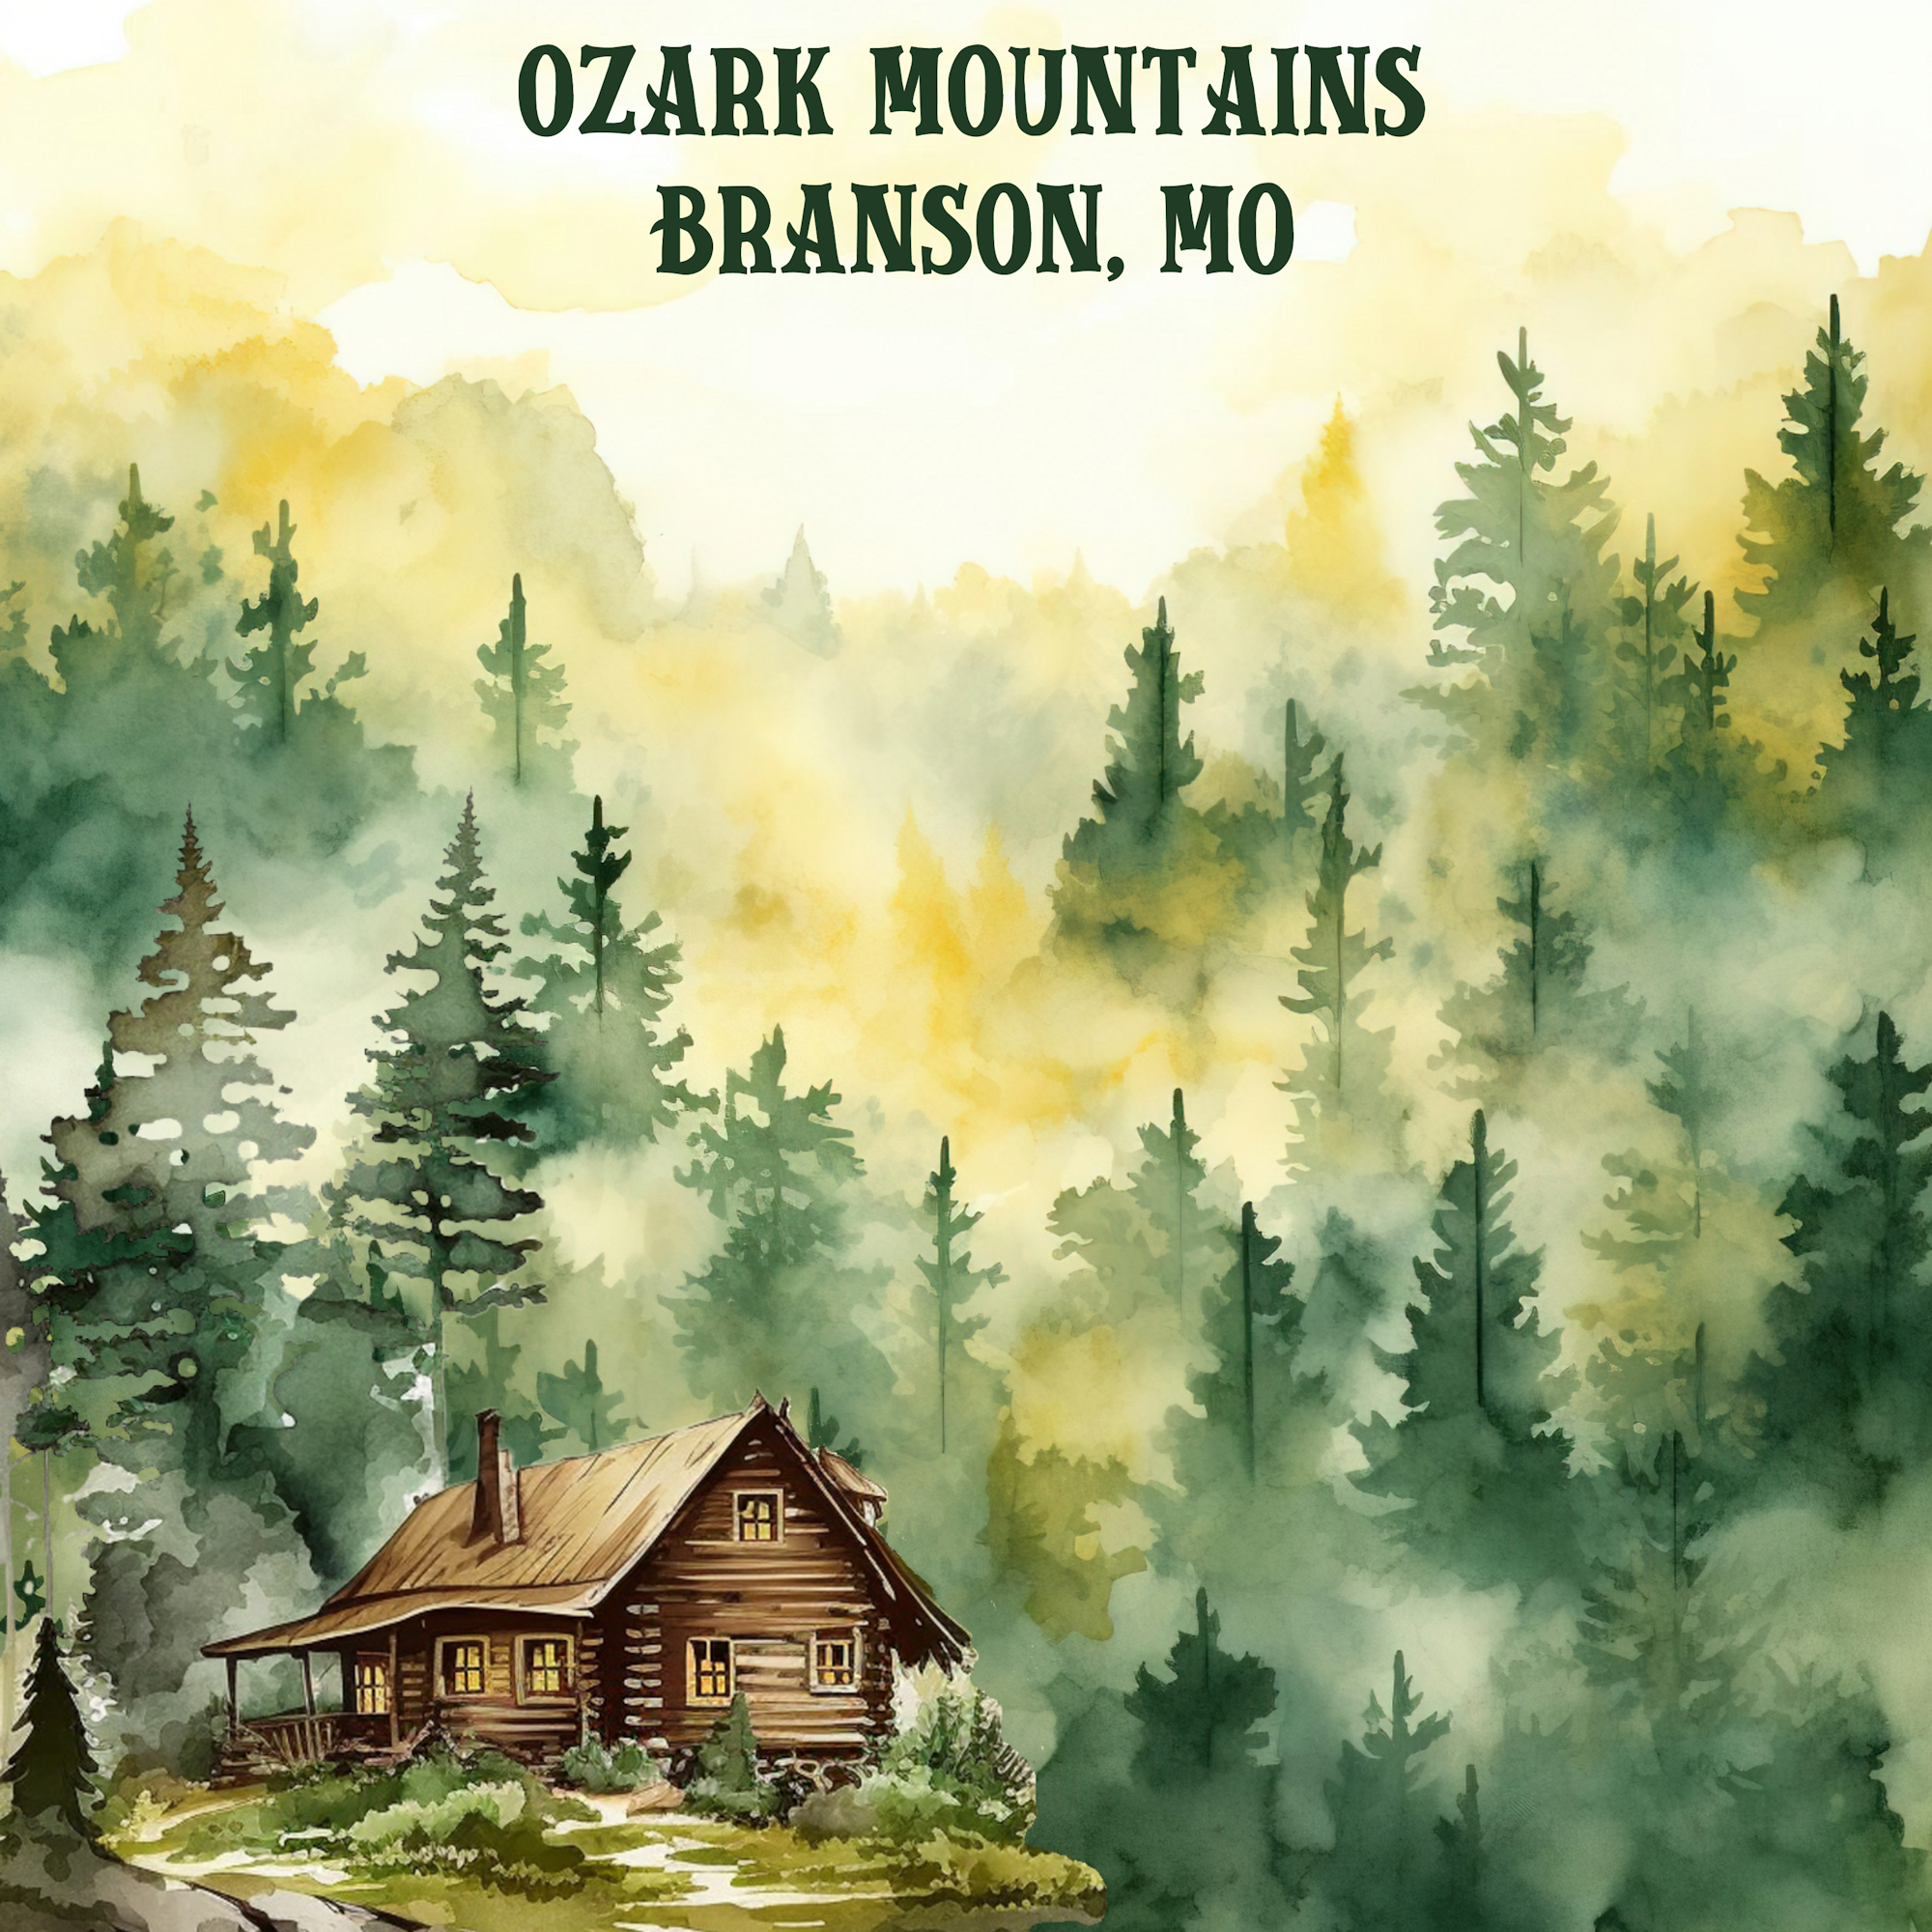 Branson, Missouri Collection Ozark Mountains 12 x 12 Double-Sided Scrapbook Paper by SSC Designs